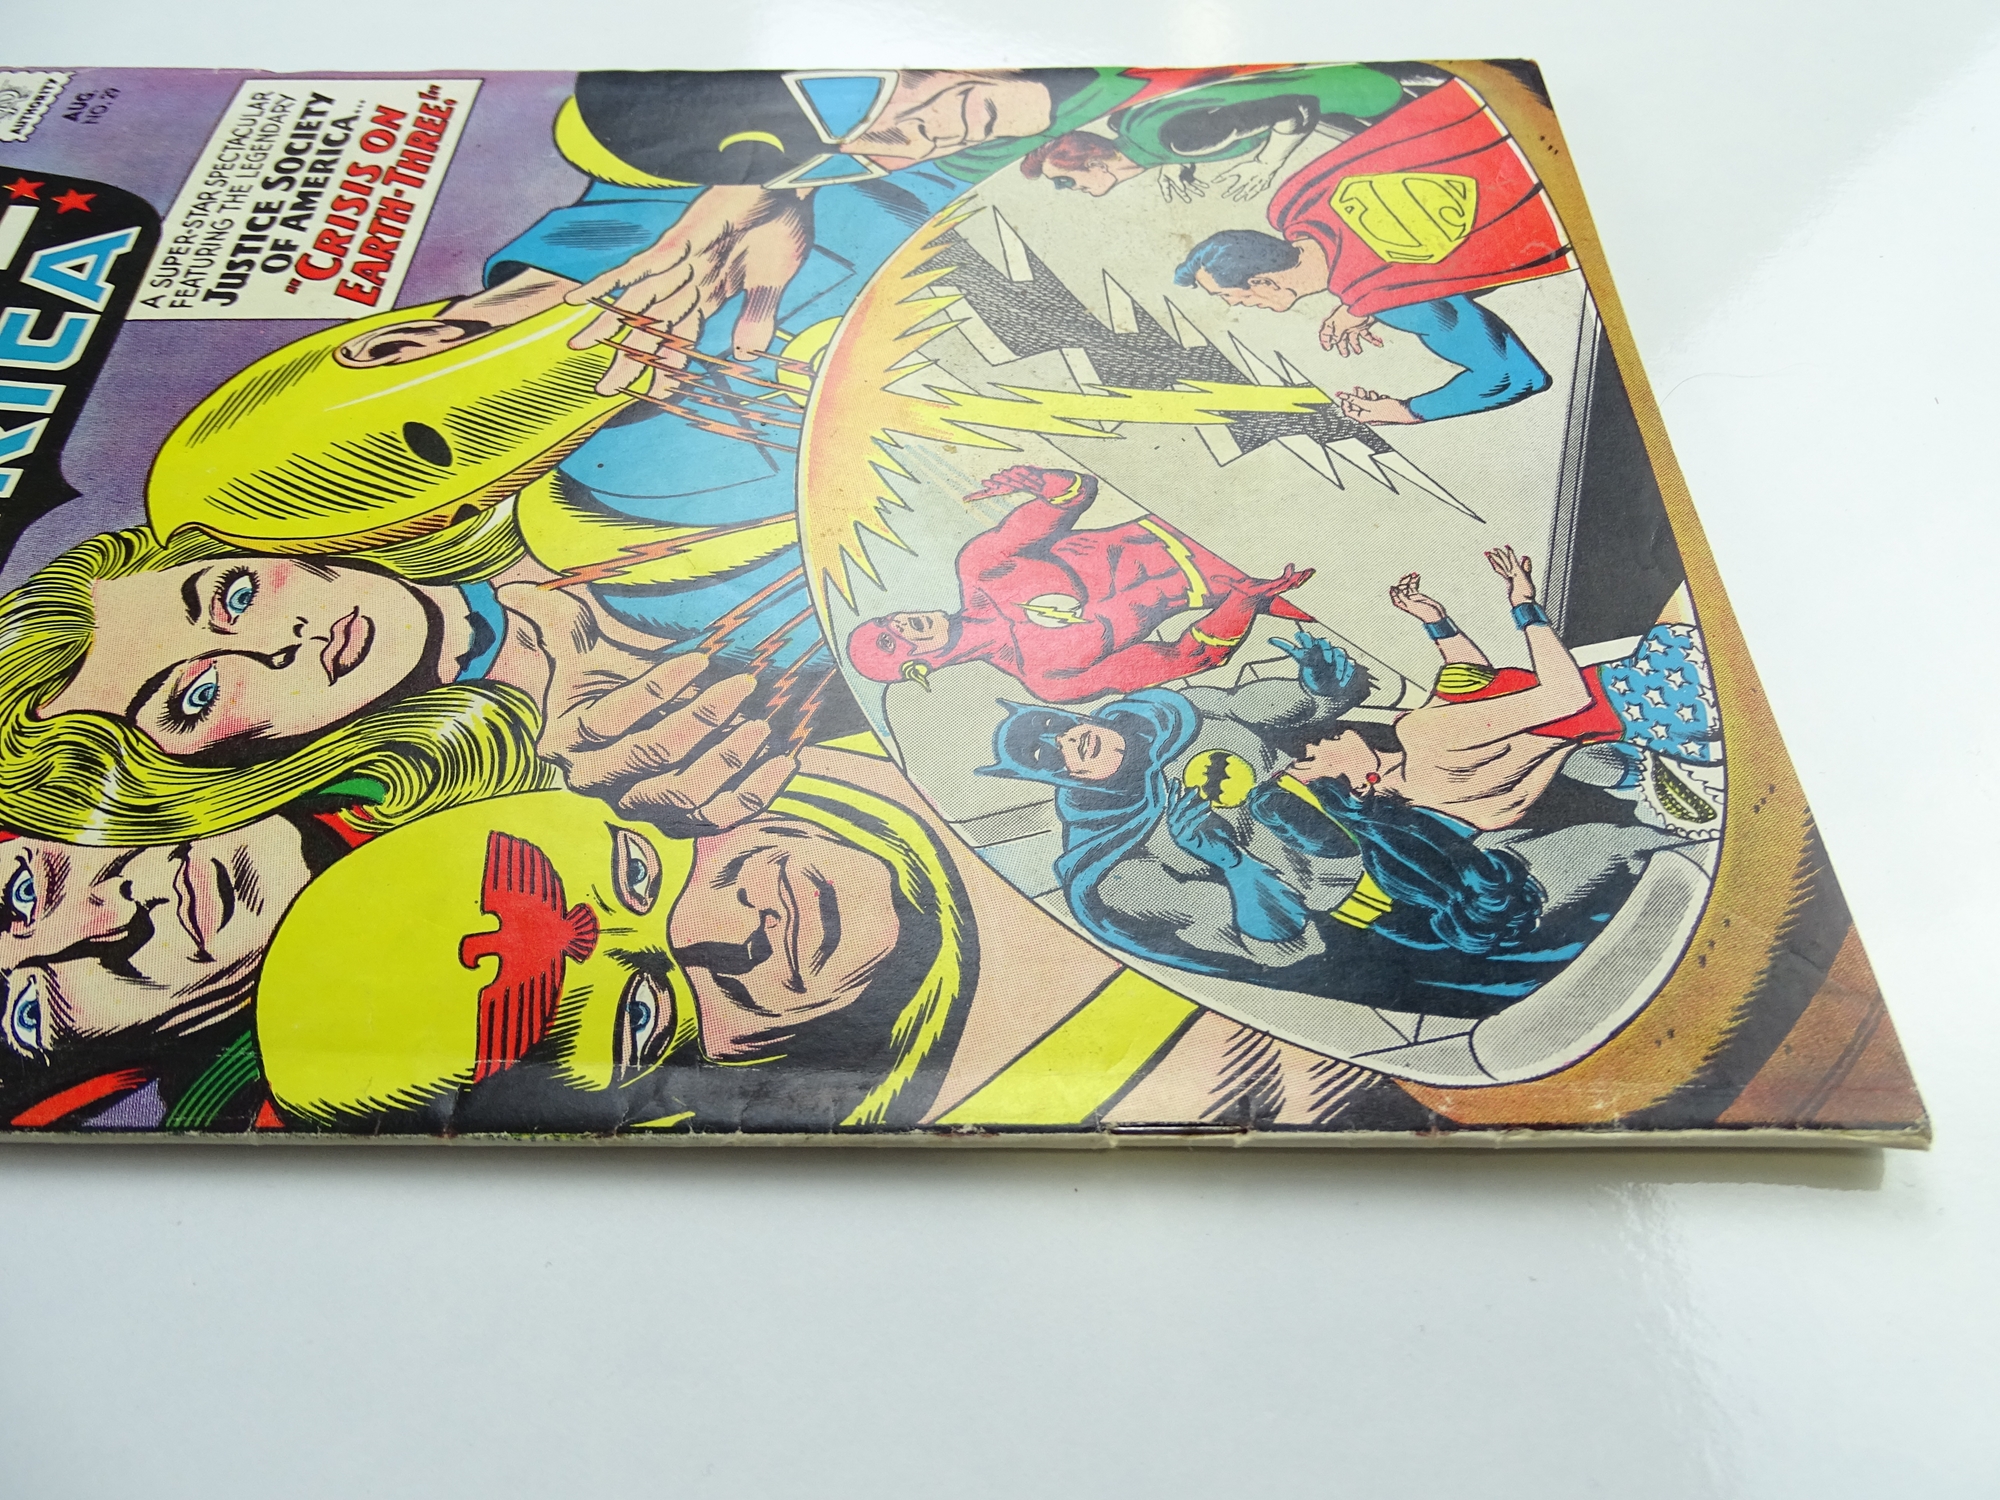 JUSTICE LEAGUE OF AMERICA # 29 (1964 - DC - Cents Copy) - 'Crisis on Earth-Three' storyline + - Image 7 of 7